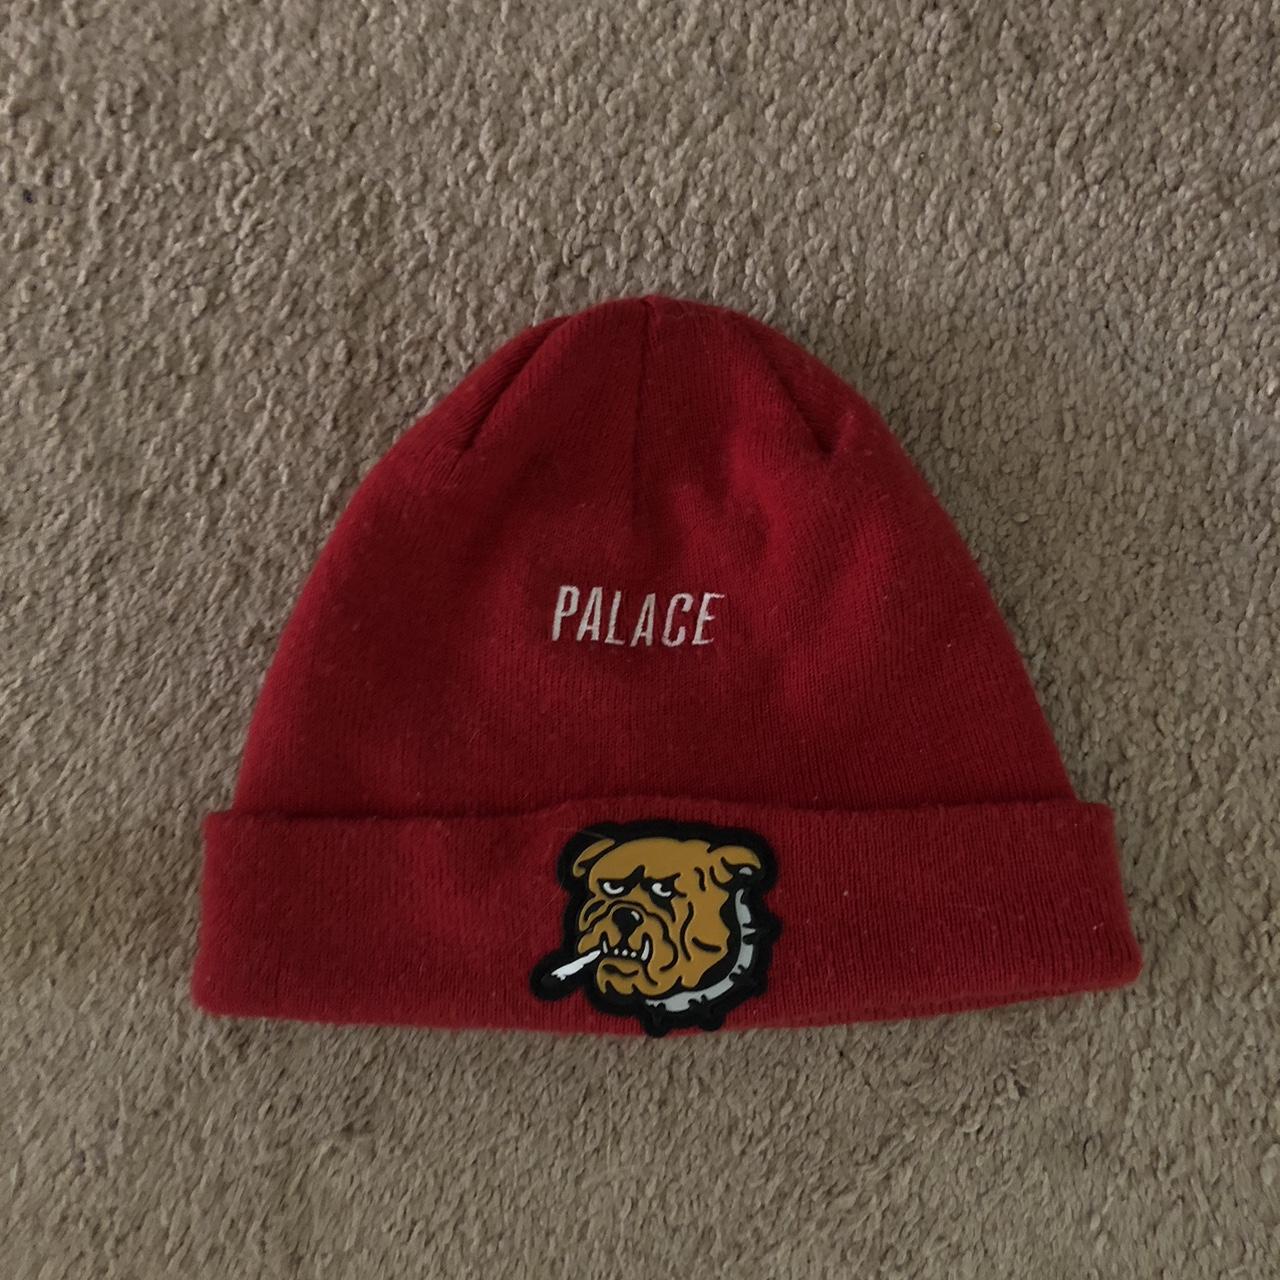 Palace Men's Burgundy and Red Hat